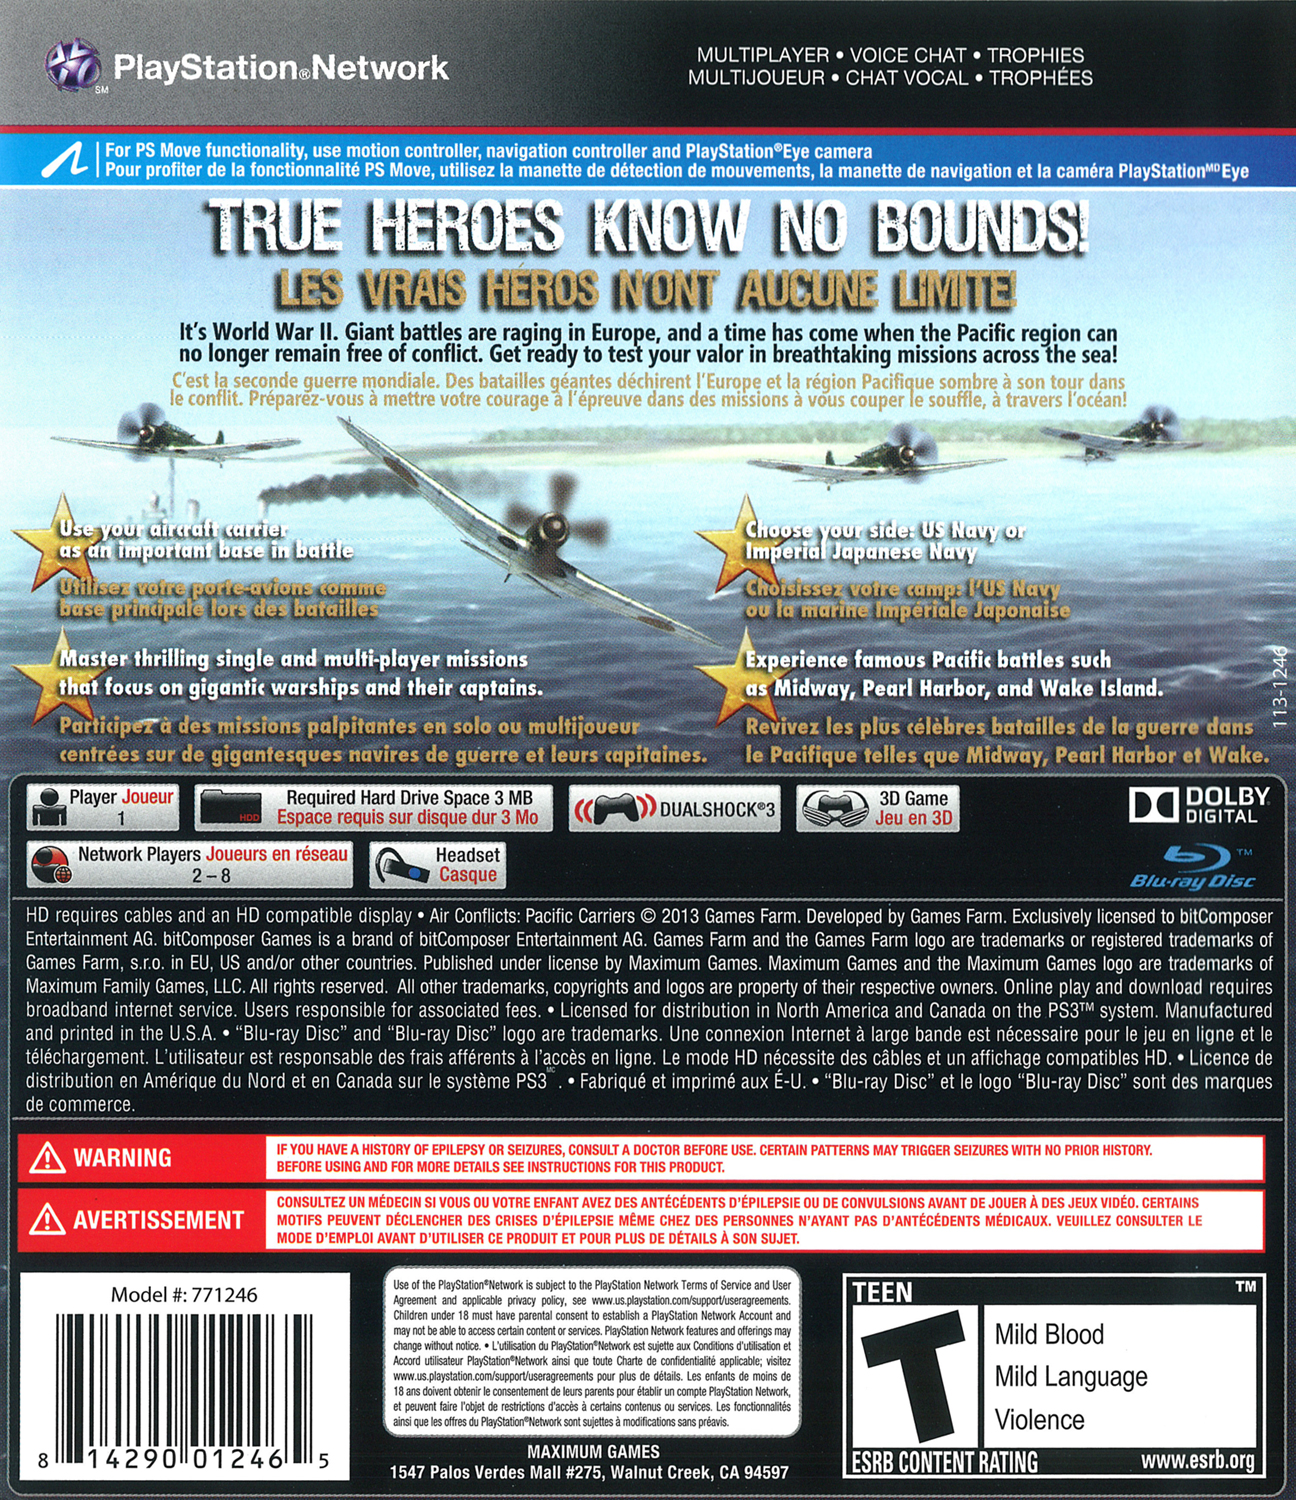 Air Conflicts Pacific Carriers - Playstation 3 - image 5 of 5